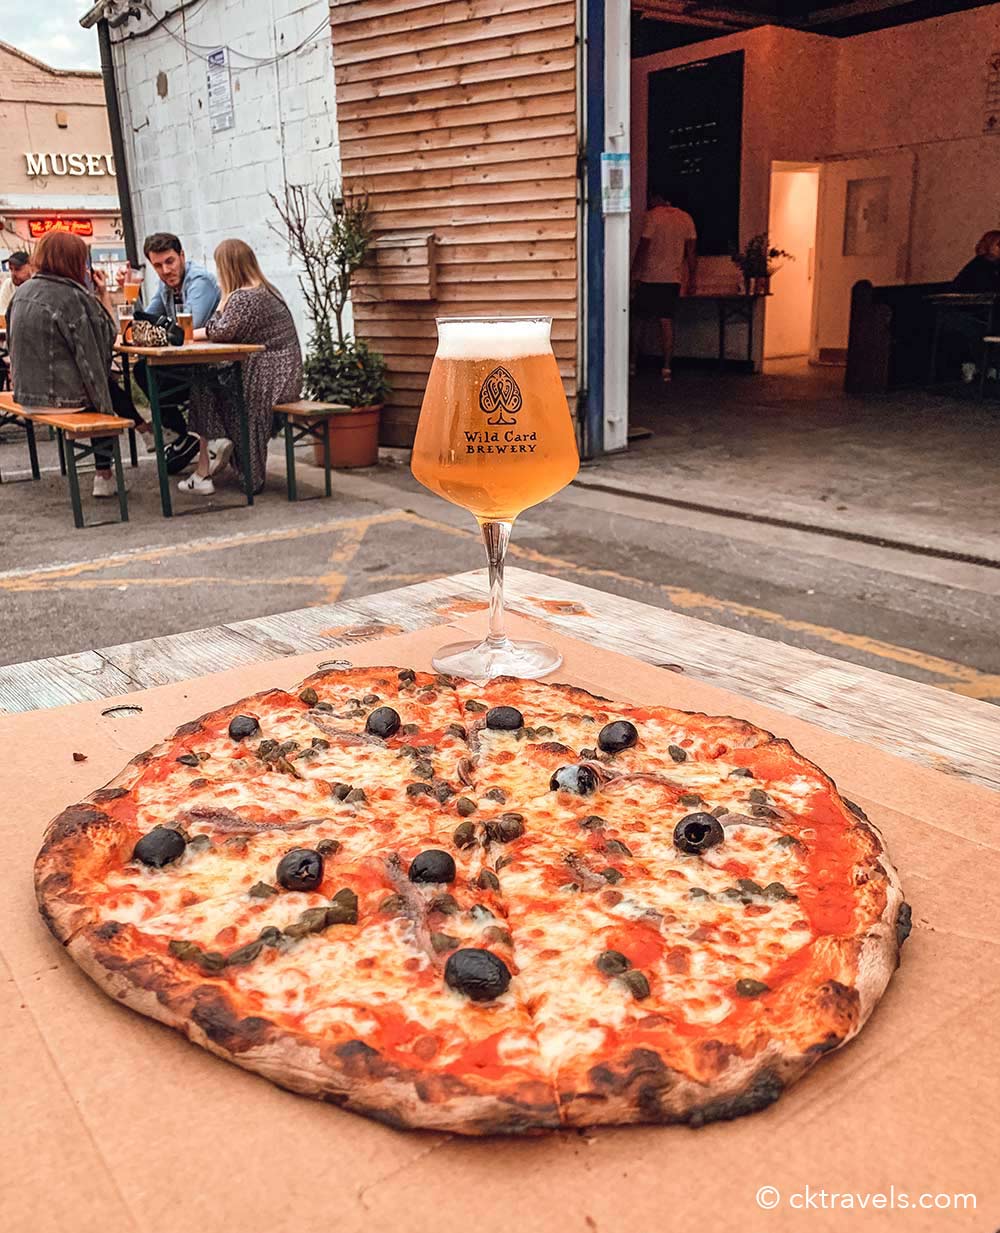 Pizza at Wildcard Brewery Walthamstow, copyright CK Travels